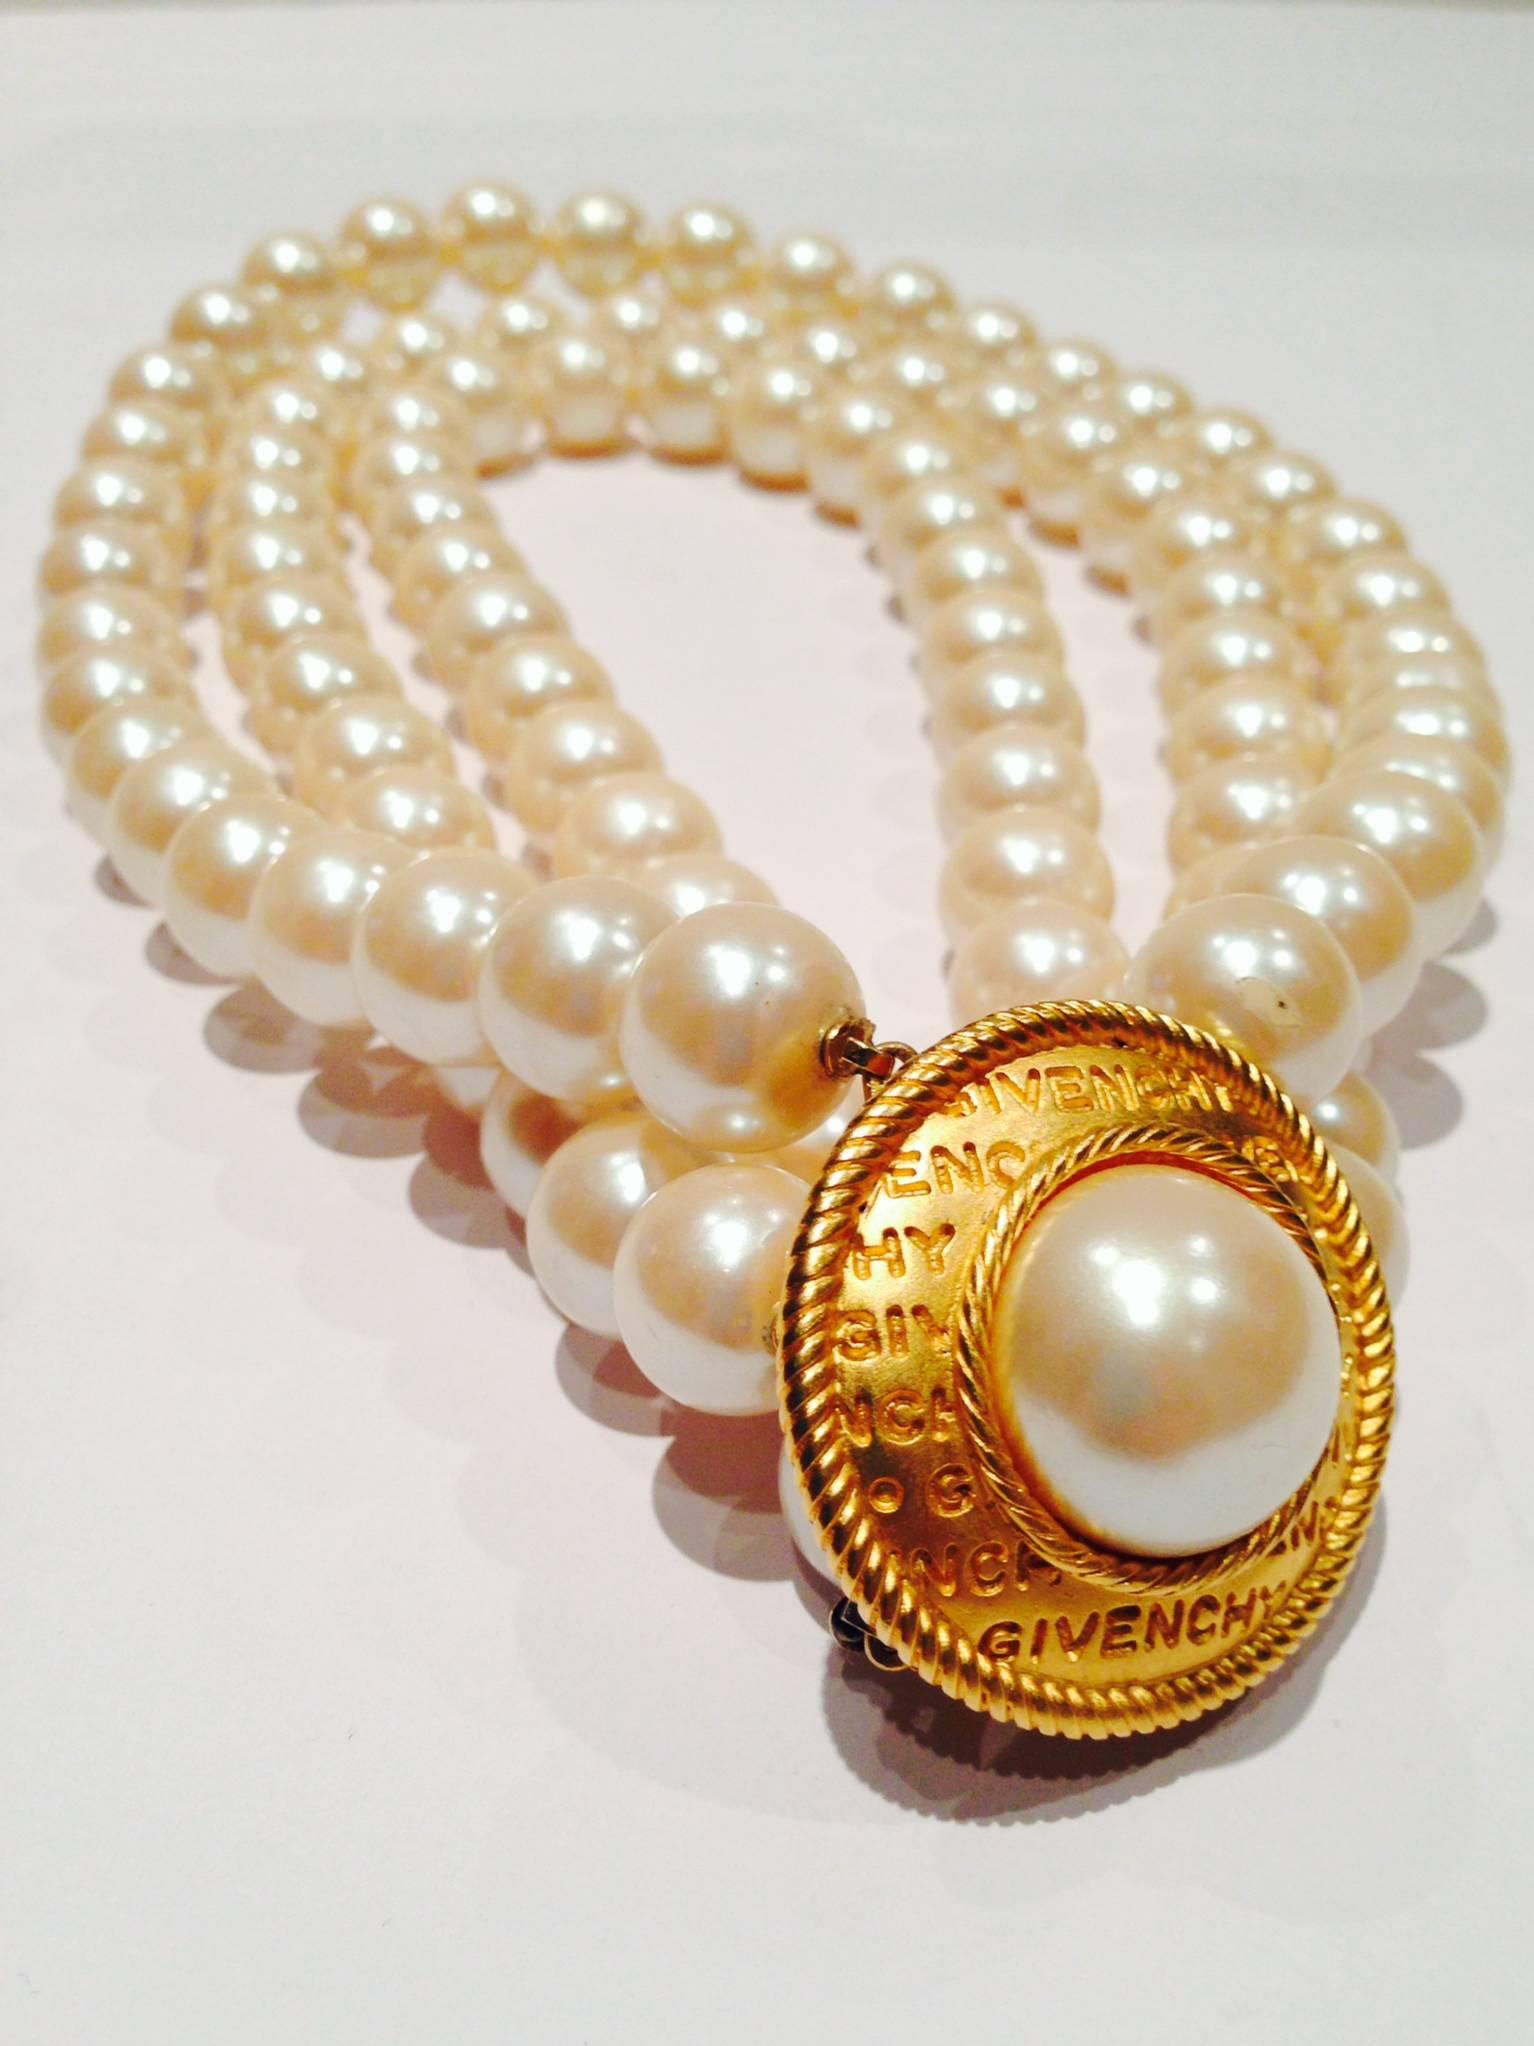 Vintage Givenchy signed gold tone logo clasp three-strand faux pearl bead choker style necklace. Clasp measures 1.75" inches diameter and can be placed anywhere on the neck. Each pearl is approximately 1.5" diameter. A substantial neutral